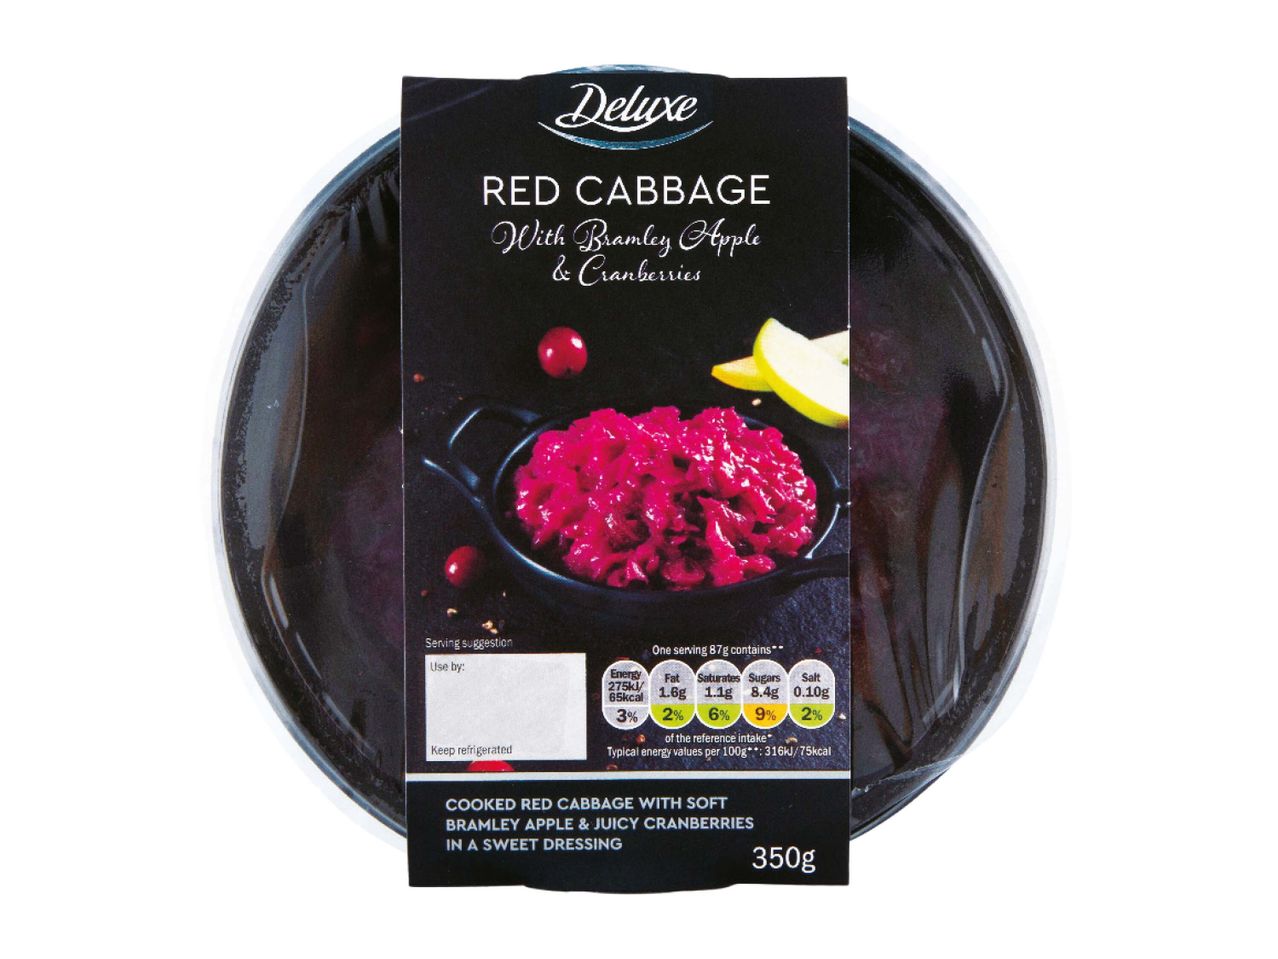 Go to full screen view: Red Cabbage with Apple & Cranberries - Image 1